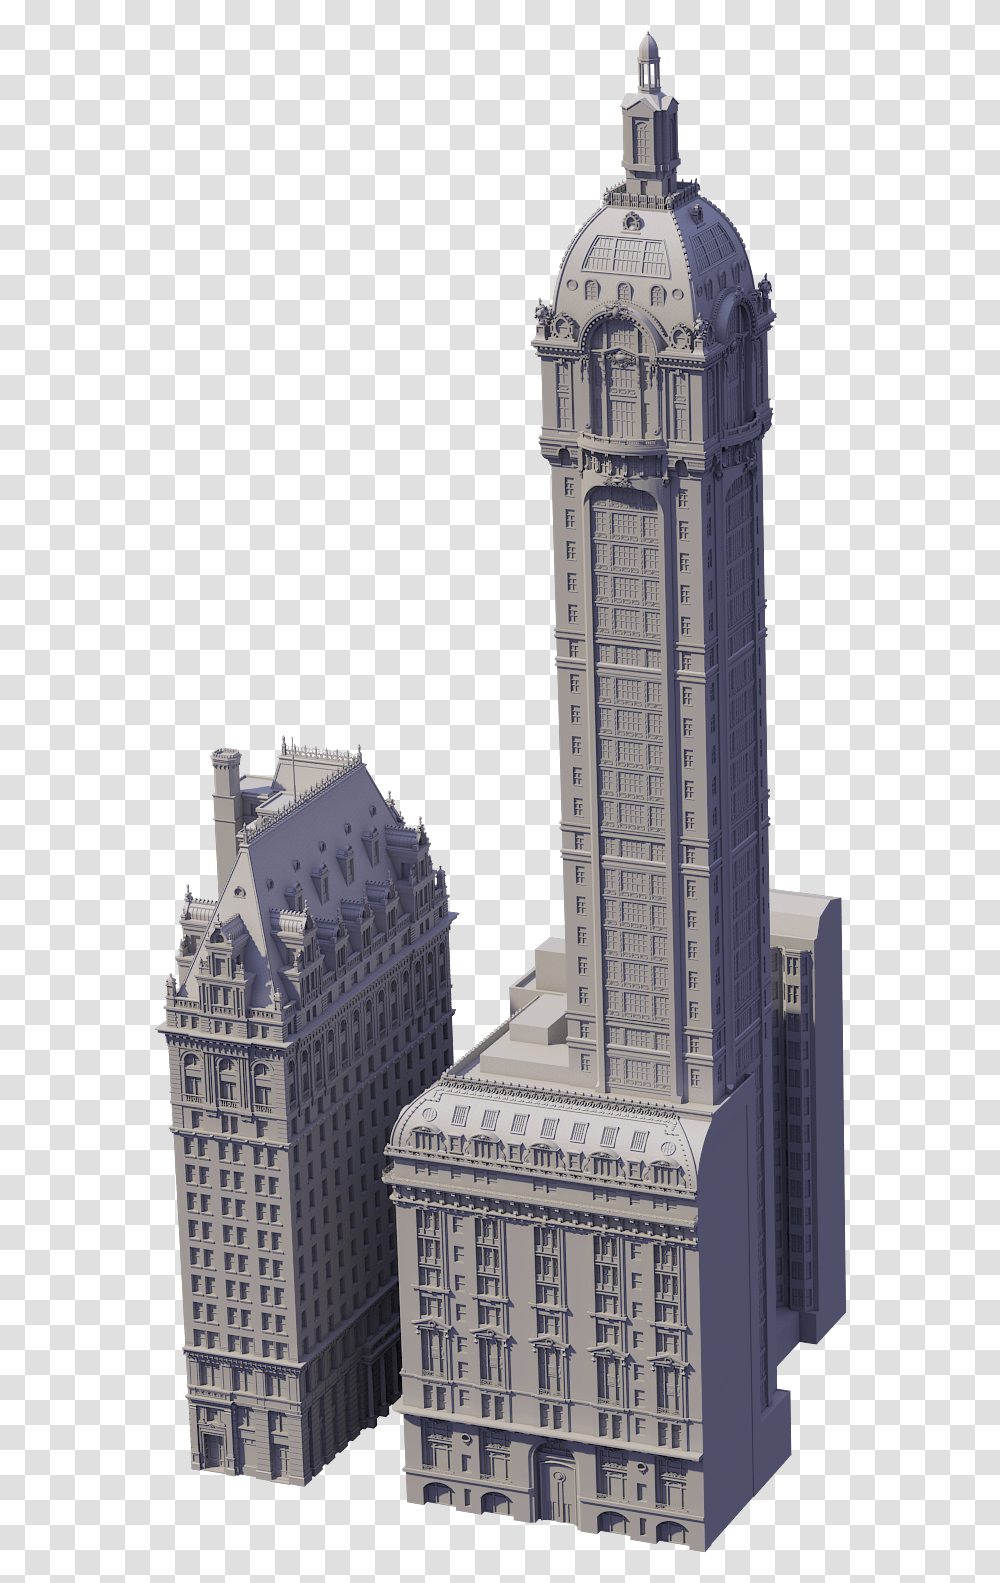 Washington Life Building New York, Office Building, Architecture, Tower, Spire Transparent Png